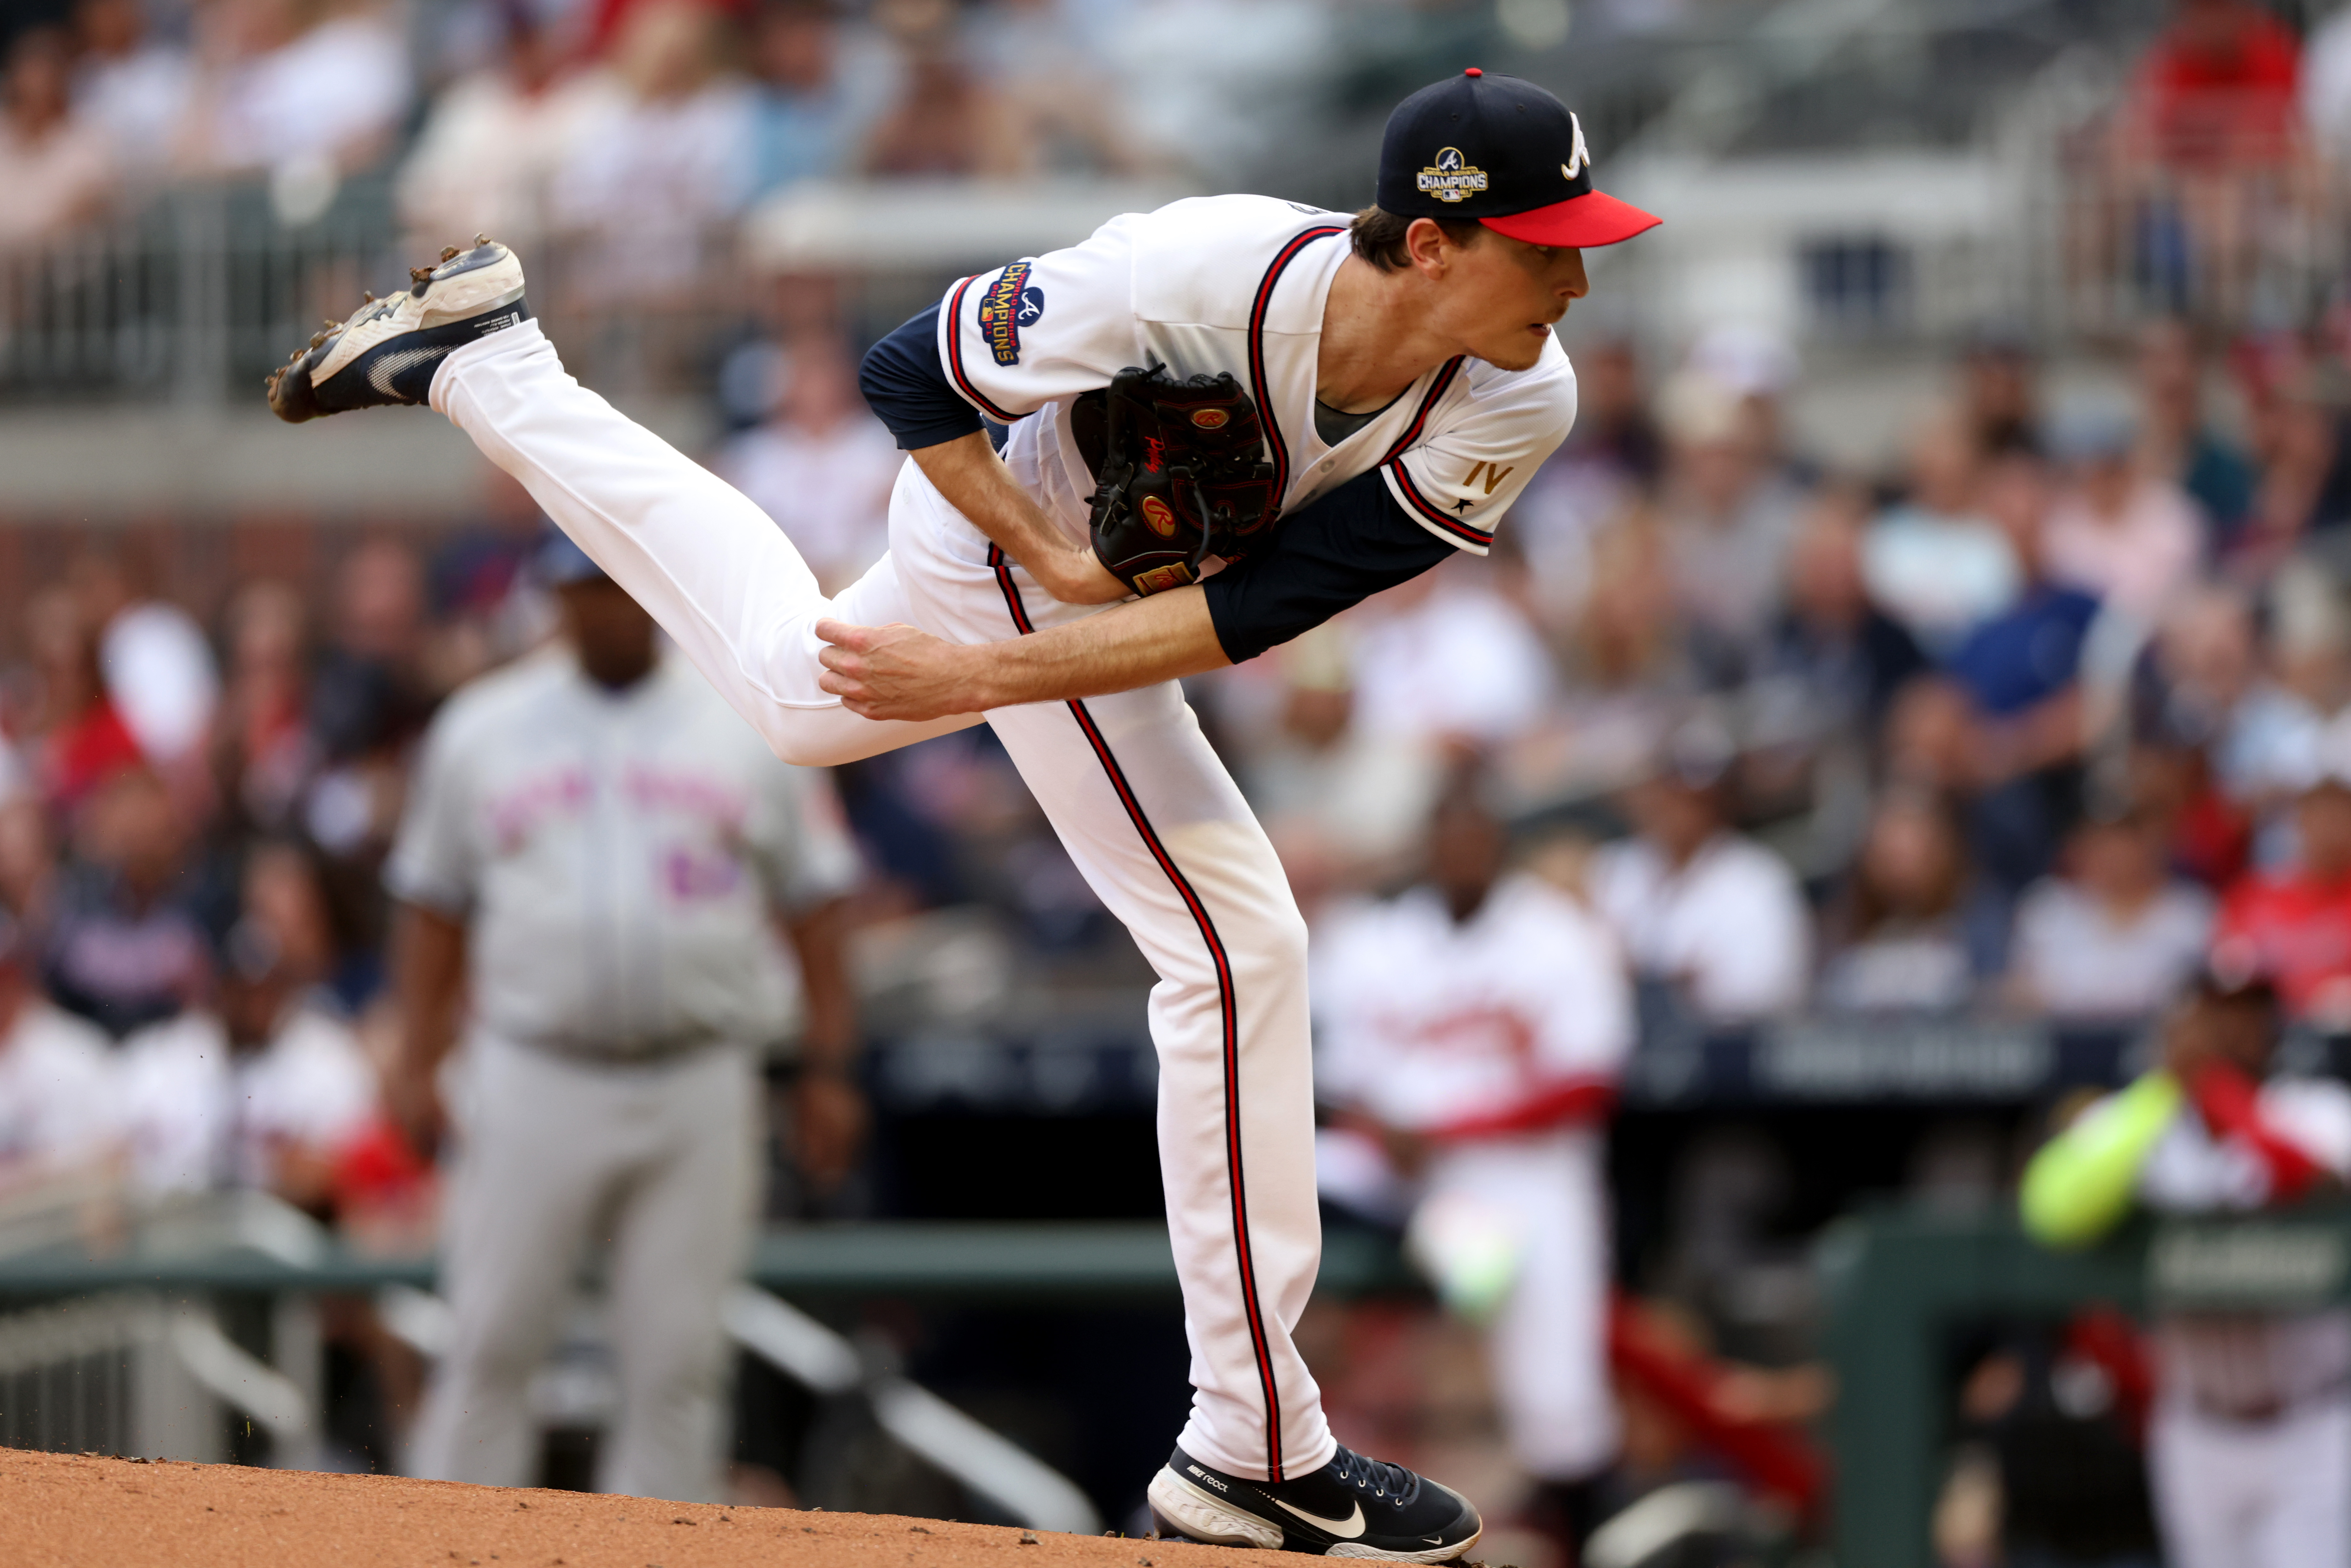 Max Fried pulls out of 2022 All-Star game